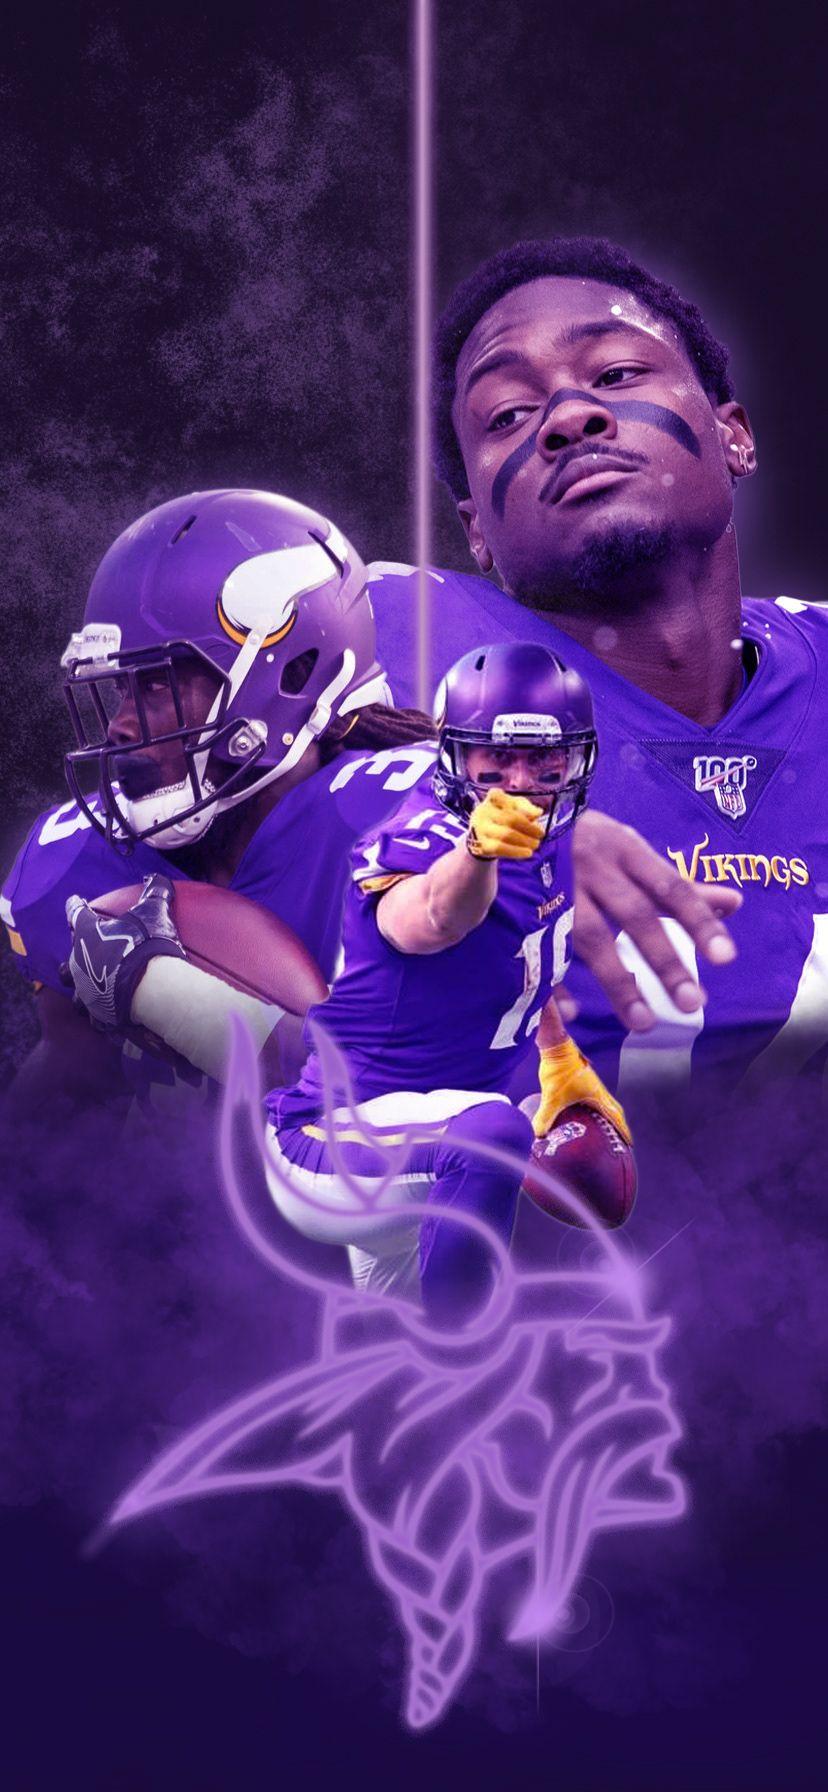 Stefon diggs wallpaper by Marqus14  Download on ZEDGE  3b37